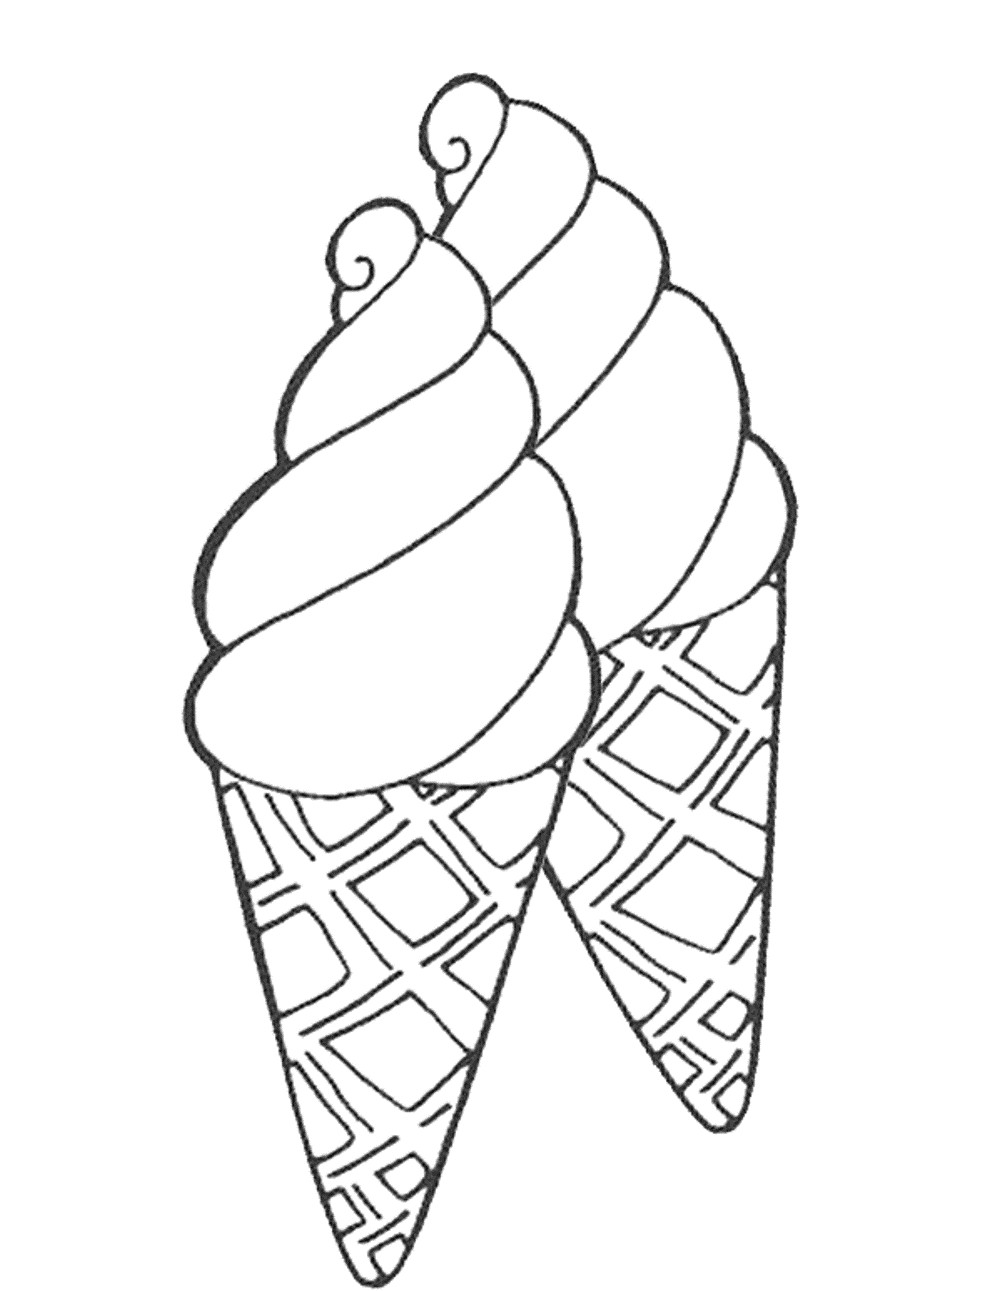 Printable Ice Cream Cone Coloring Pages at GetDrawings Free download